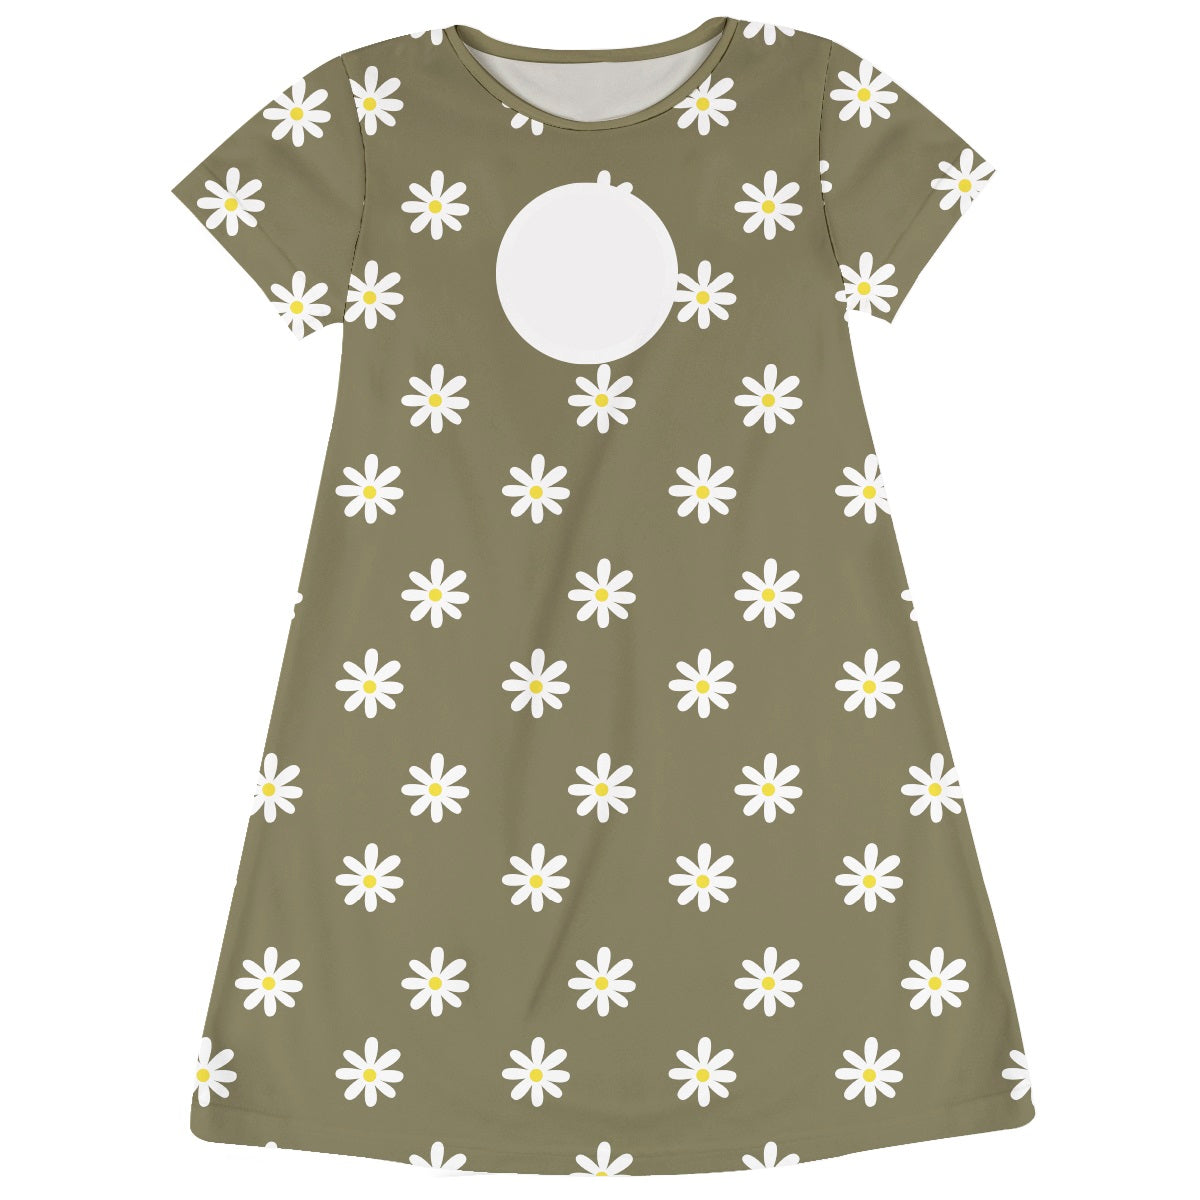 Daisy Flowers Print Personalized Monogram Olive Green Short Sleeve a Line Dress - Wimziy&Co.